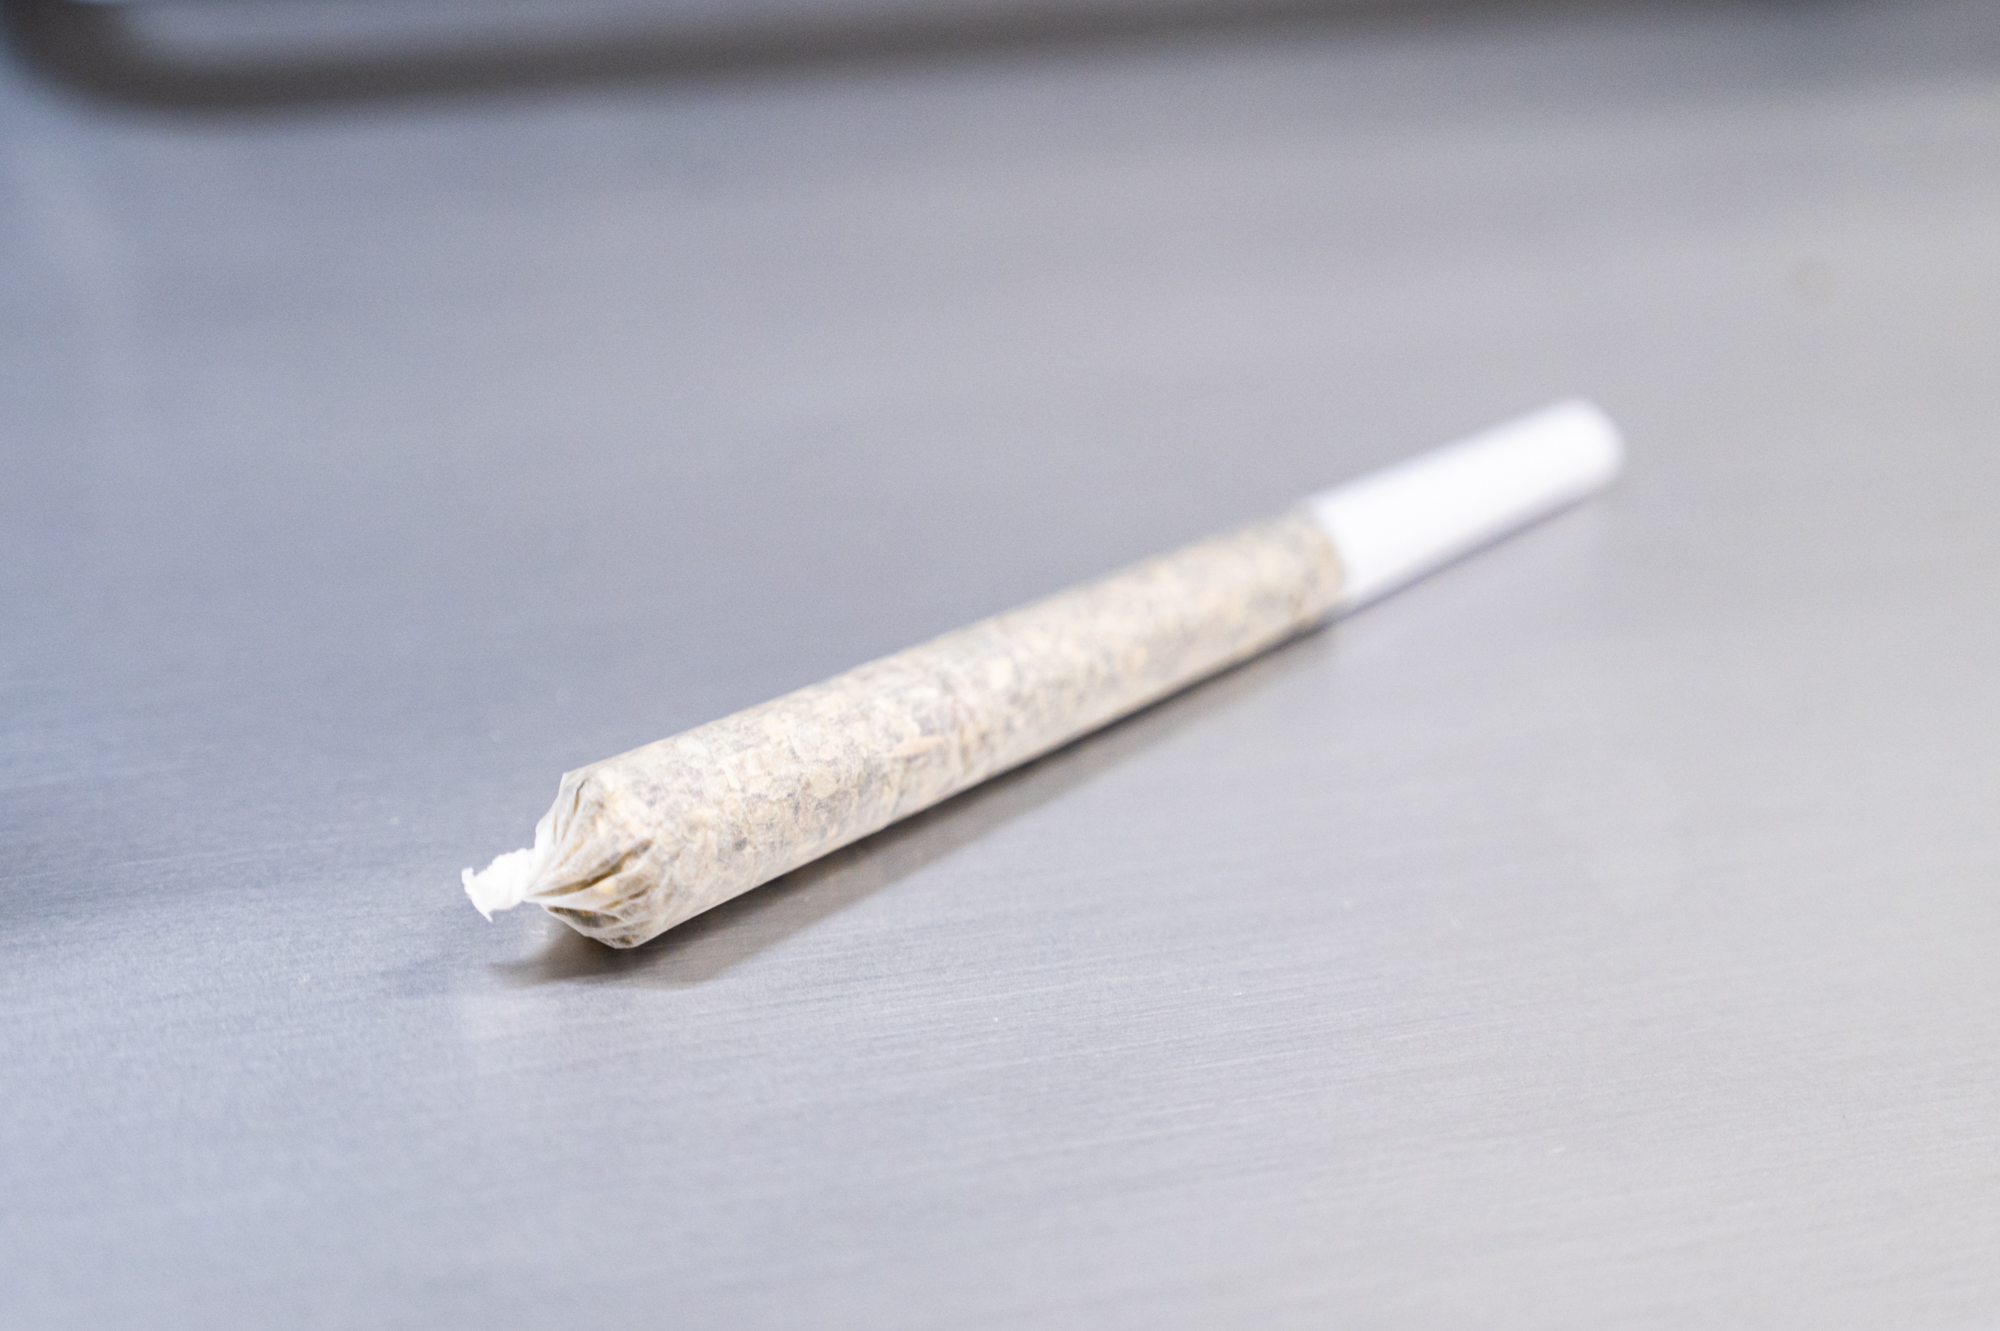 A pre-rolled joint made with the AutoTwist Pre Roll Finishing machine, featuring a tightly packed and twisted cone-shaped joint with a filter tip at the end